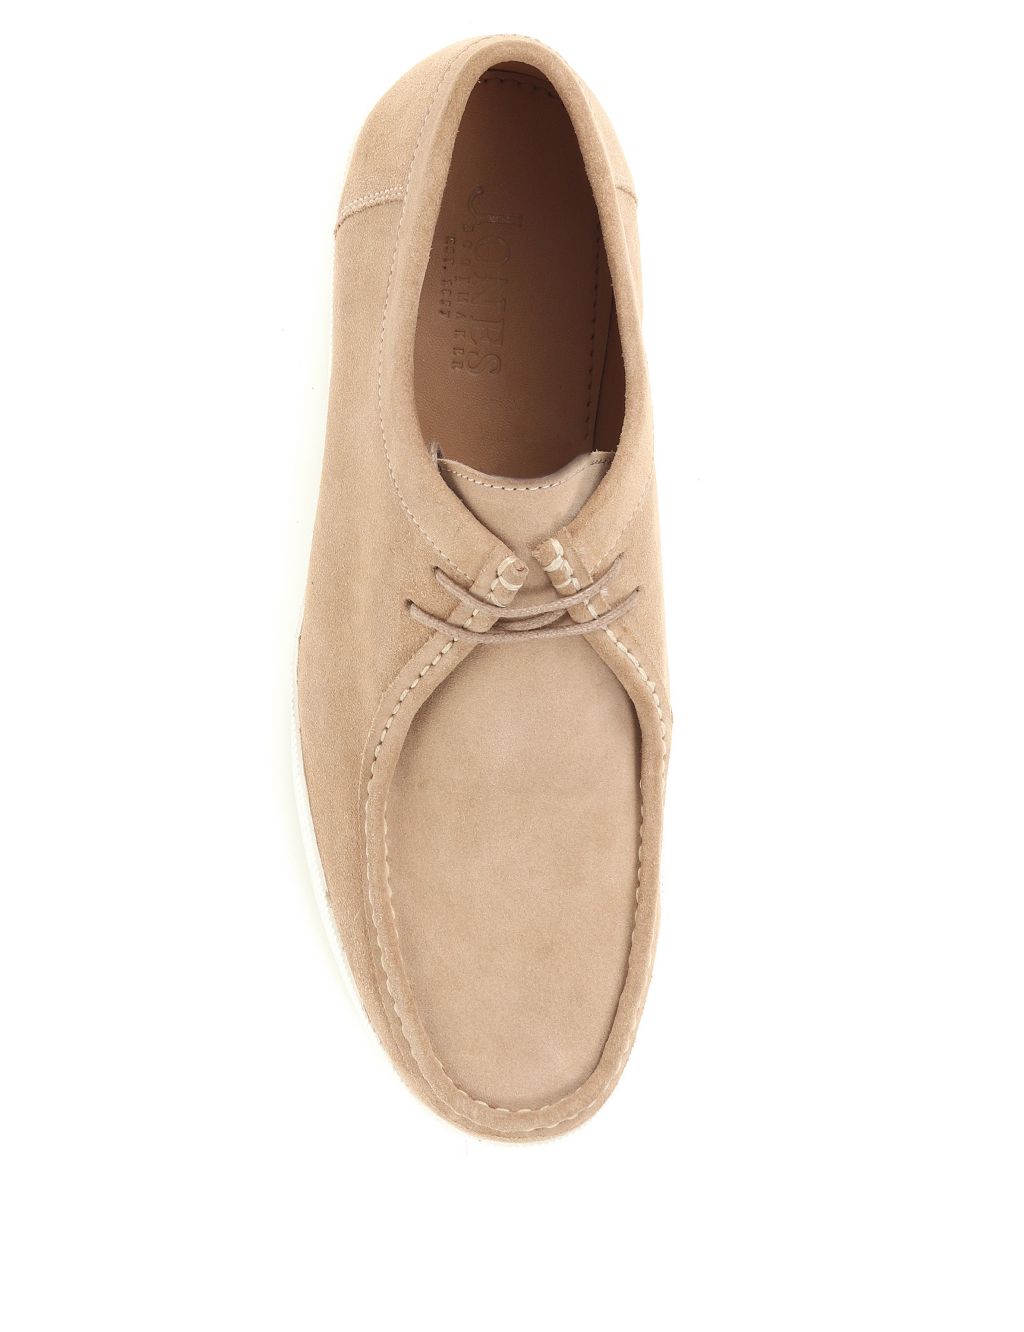 Suede Lace Up Casuals image 3